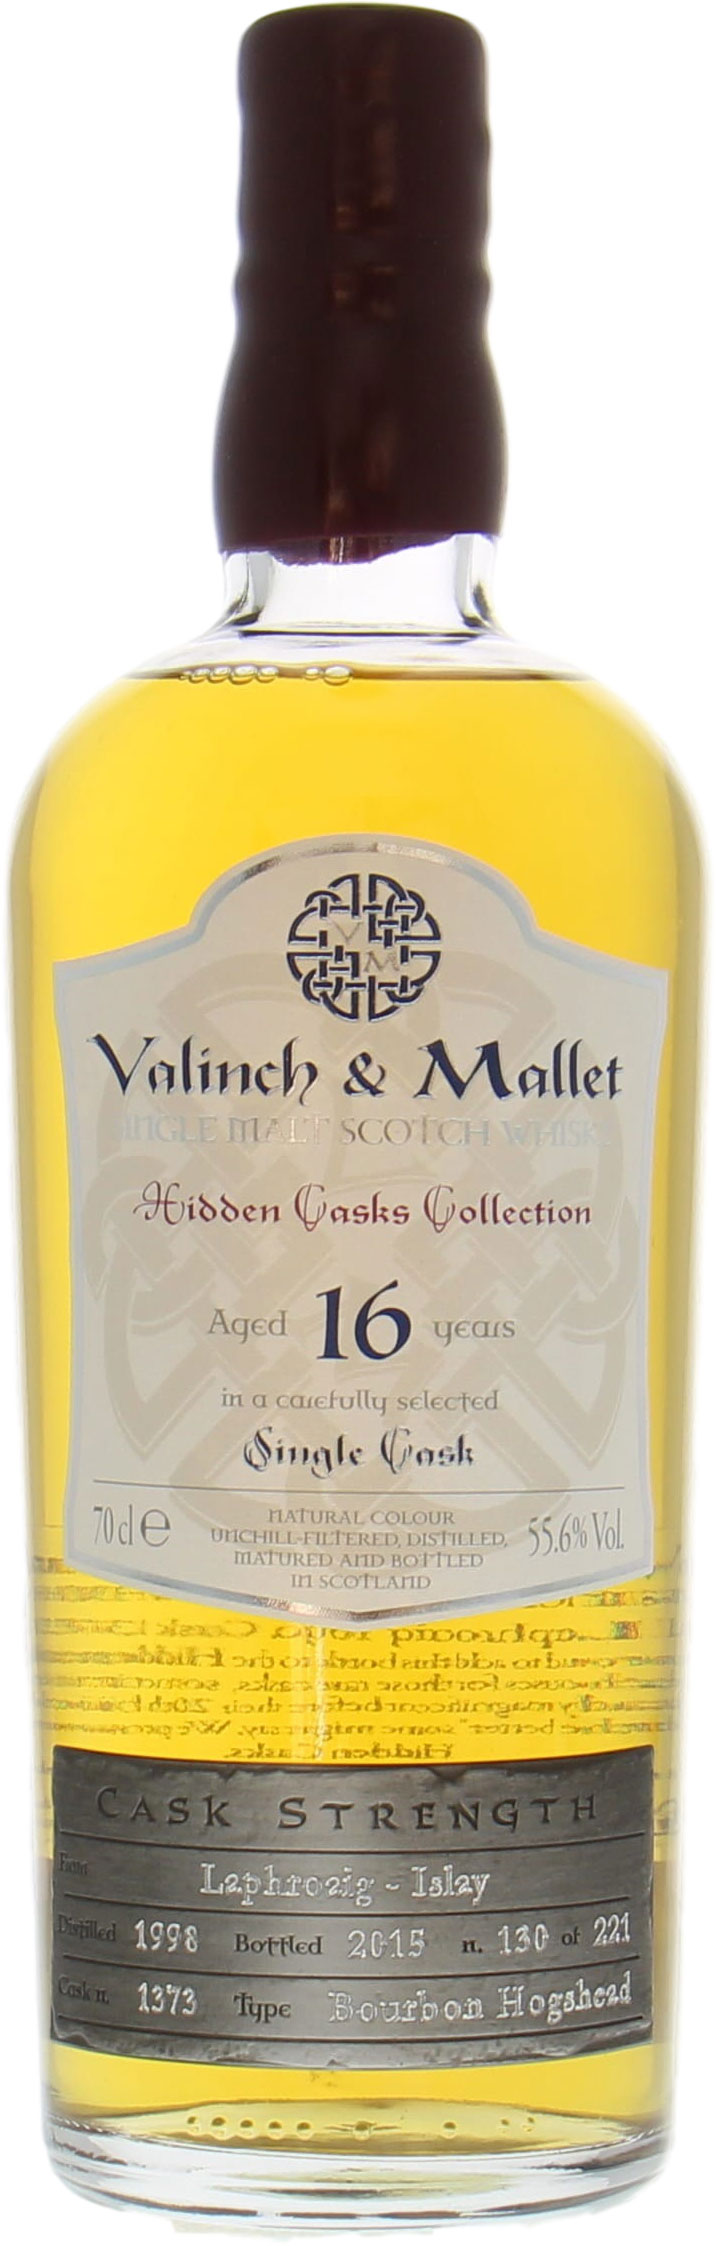 Laphroaig - 16 Years Old Valinch & Mallet Cask 1373 55.6% 1998 Perfect